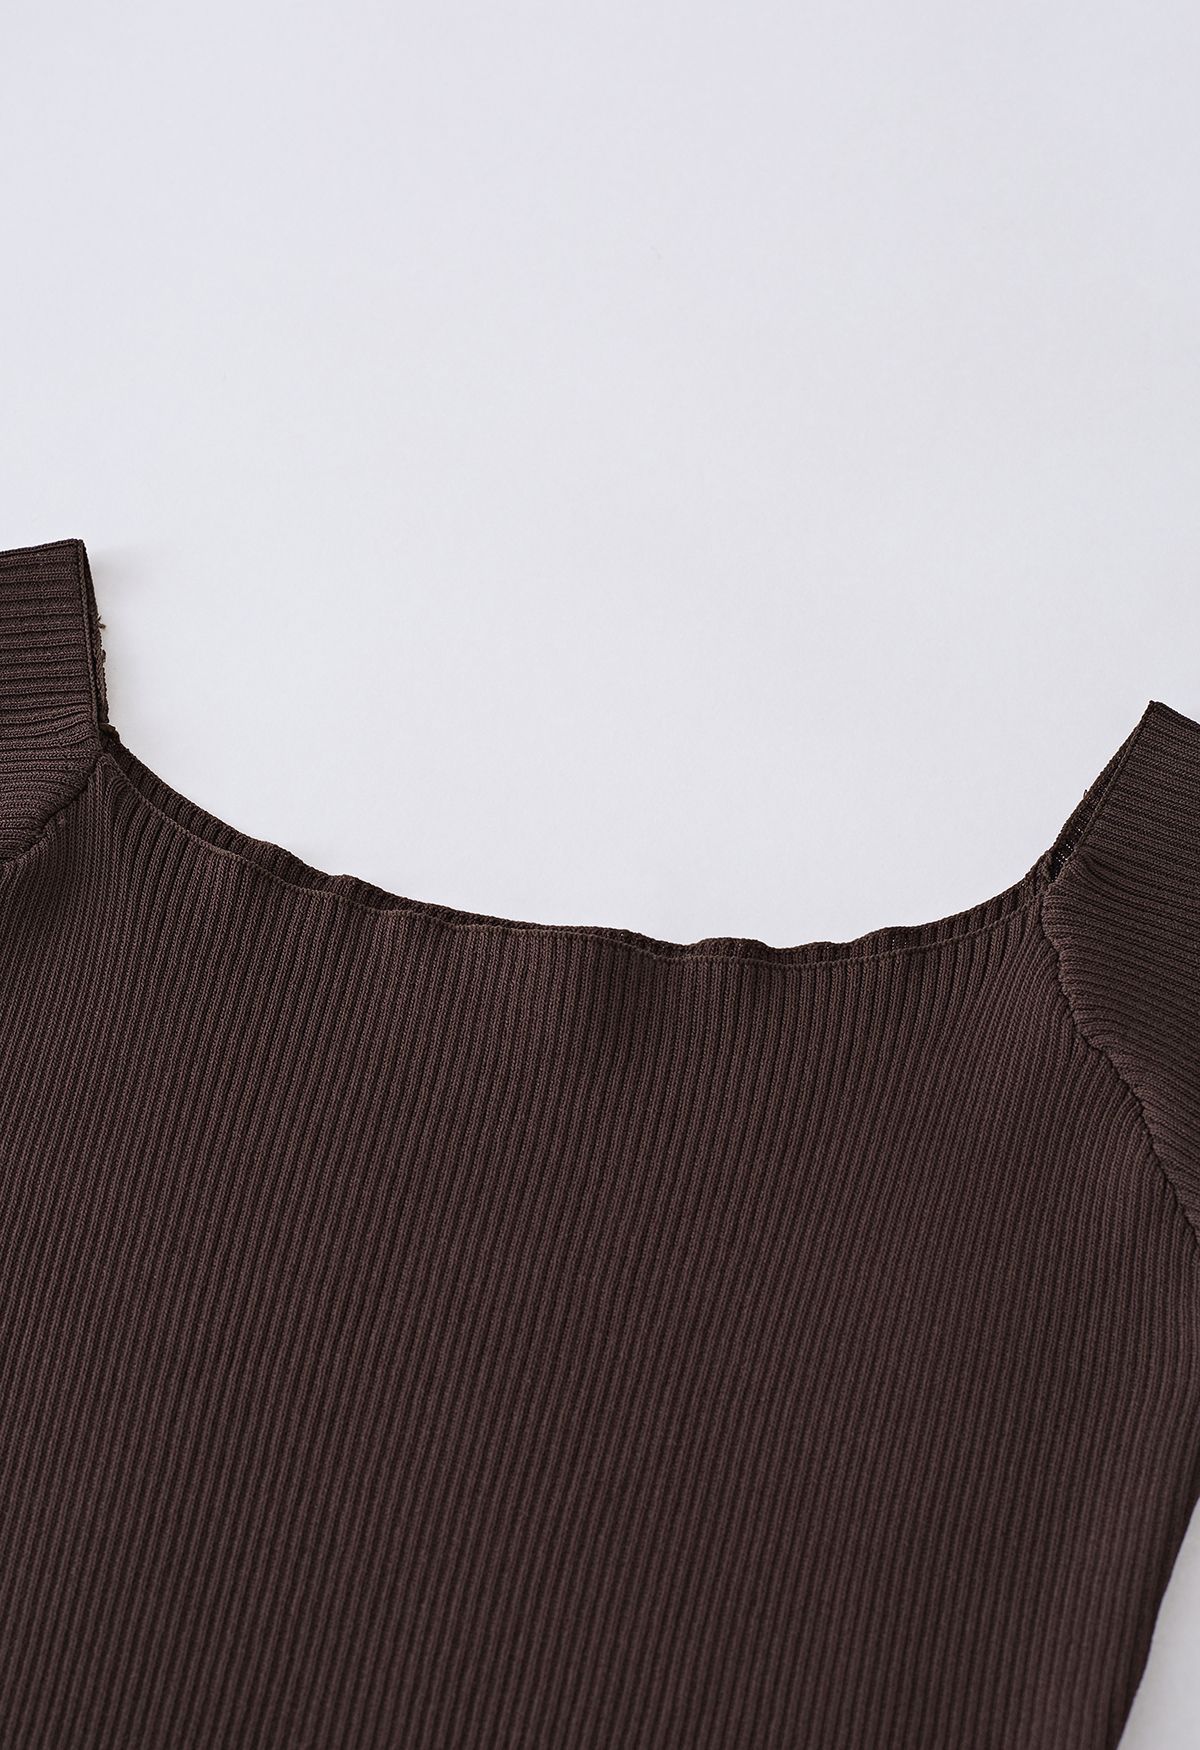 Boat Neck Rib Knit Crop Top in Brown